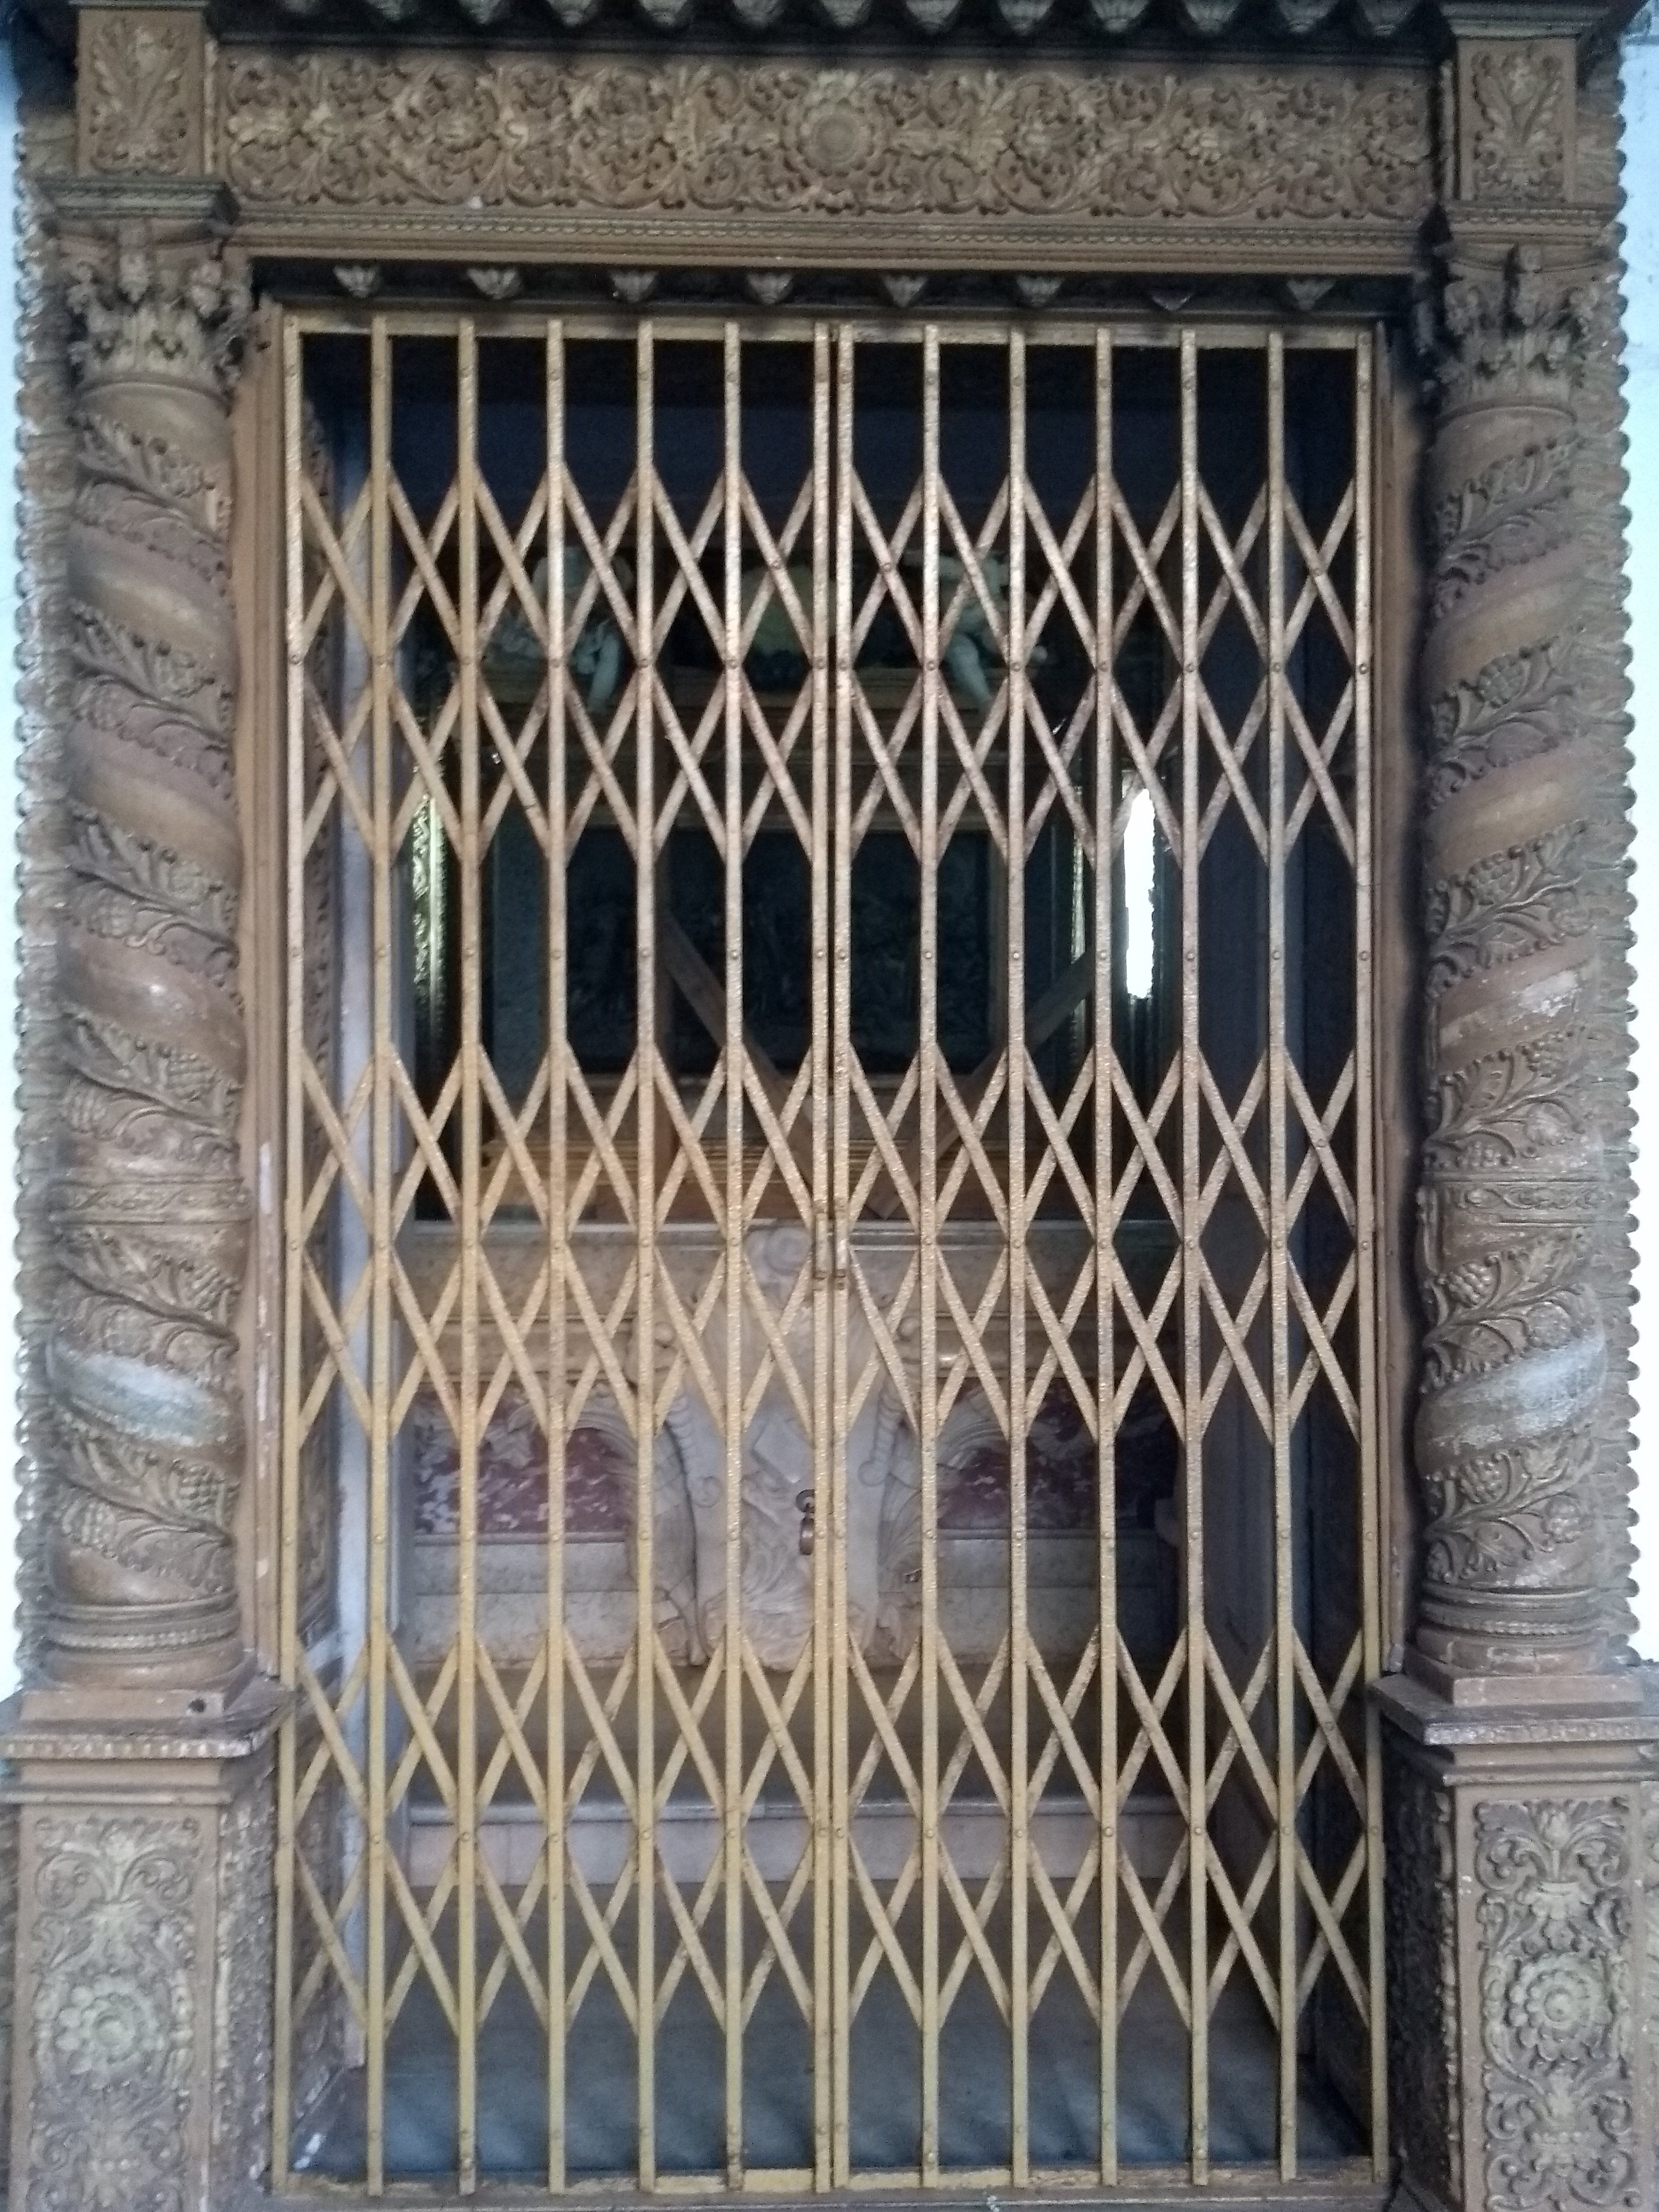 Decorated gate leading to St Francis Xavier's Coffin location.